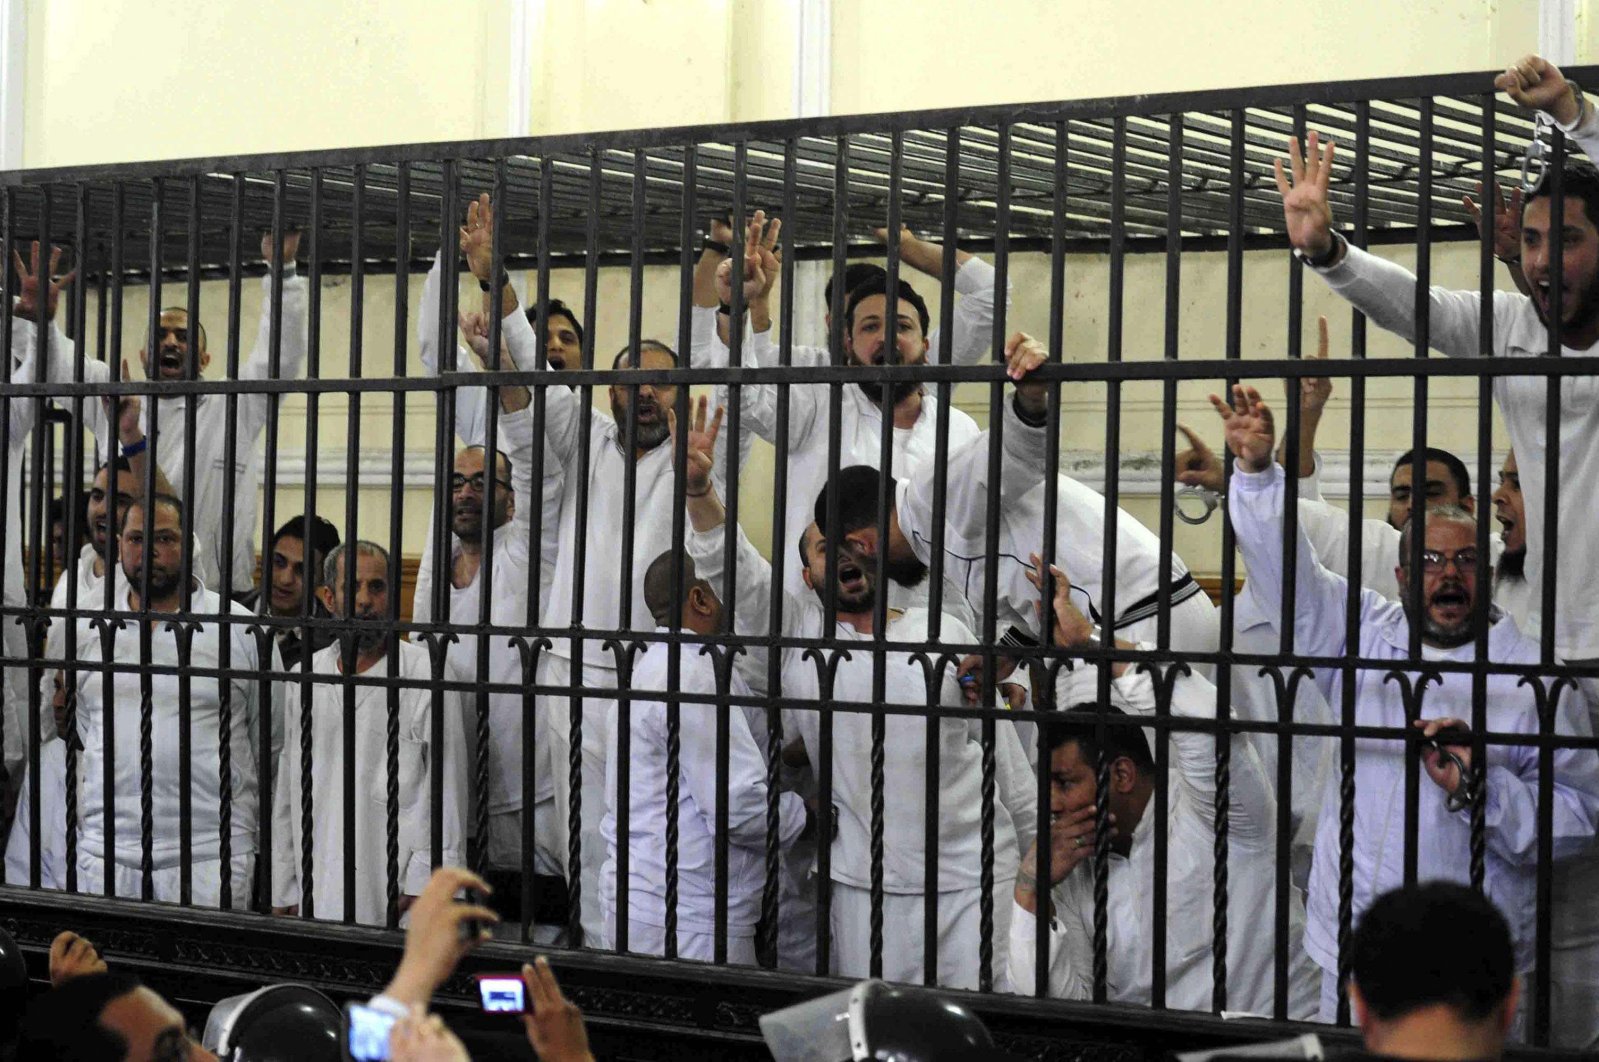 Supporters of the Muslim Brotherhood and ousted President Mohammed Morsi stand trial in Alexandria, Egypt, March 29, 2014. (Reuters Photo)